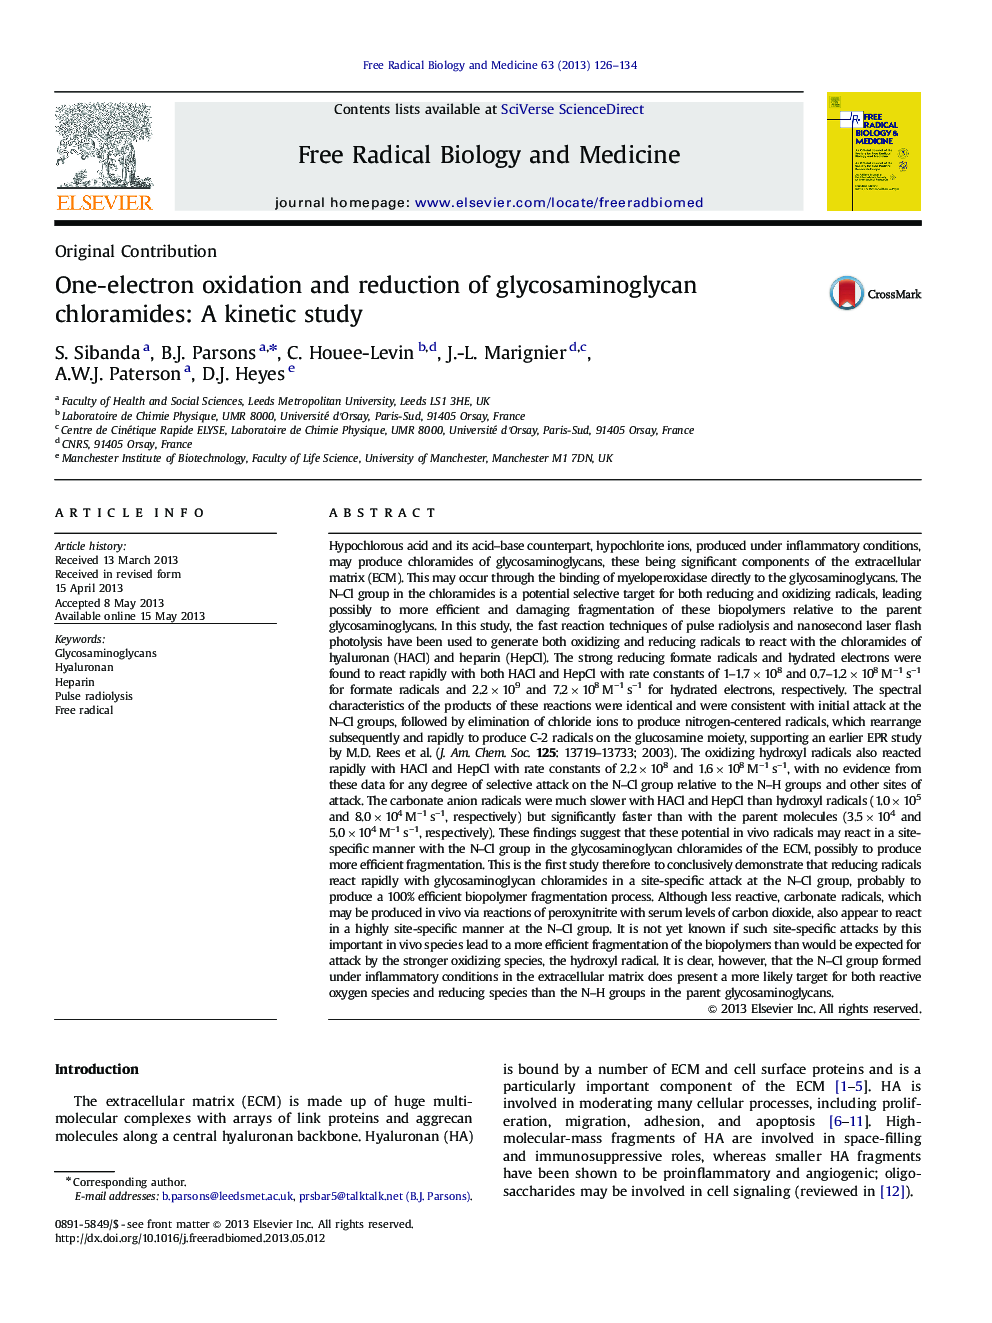 One-electron oxidation and reduction of glycosaminoglycan chloramides: A kinetic study